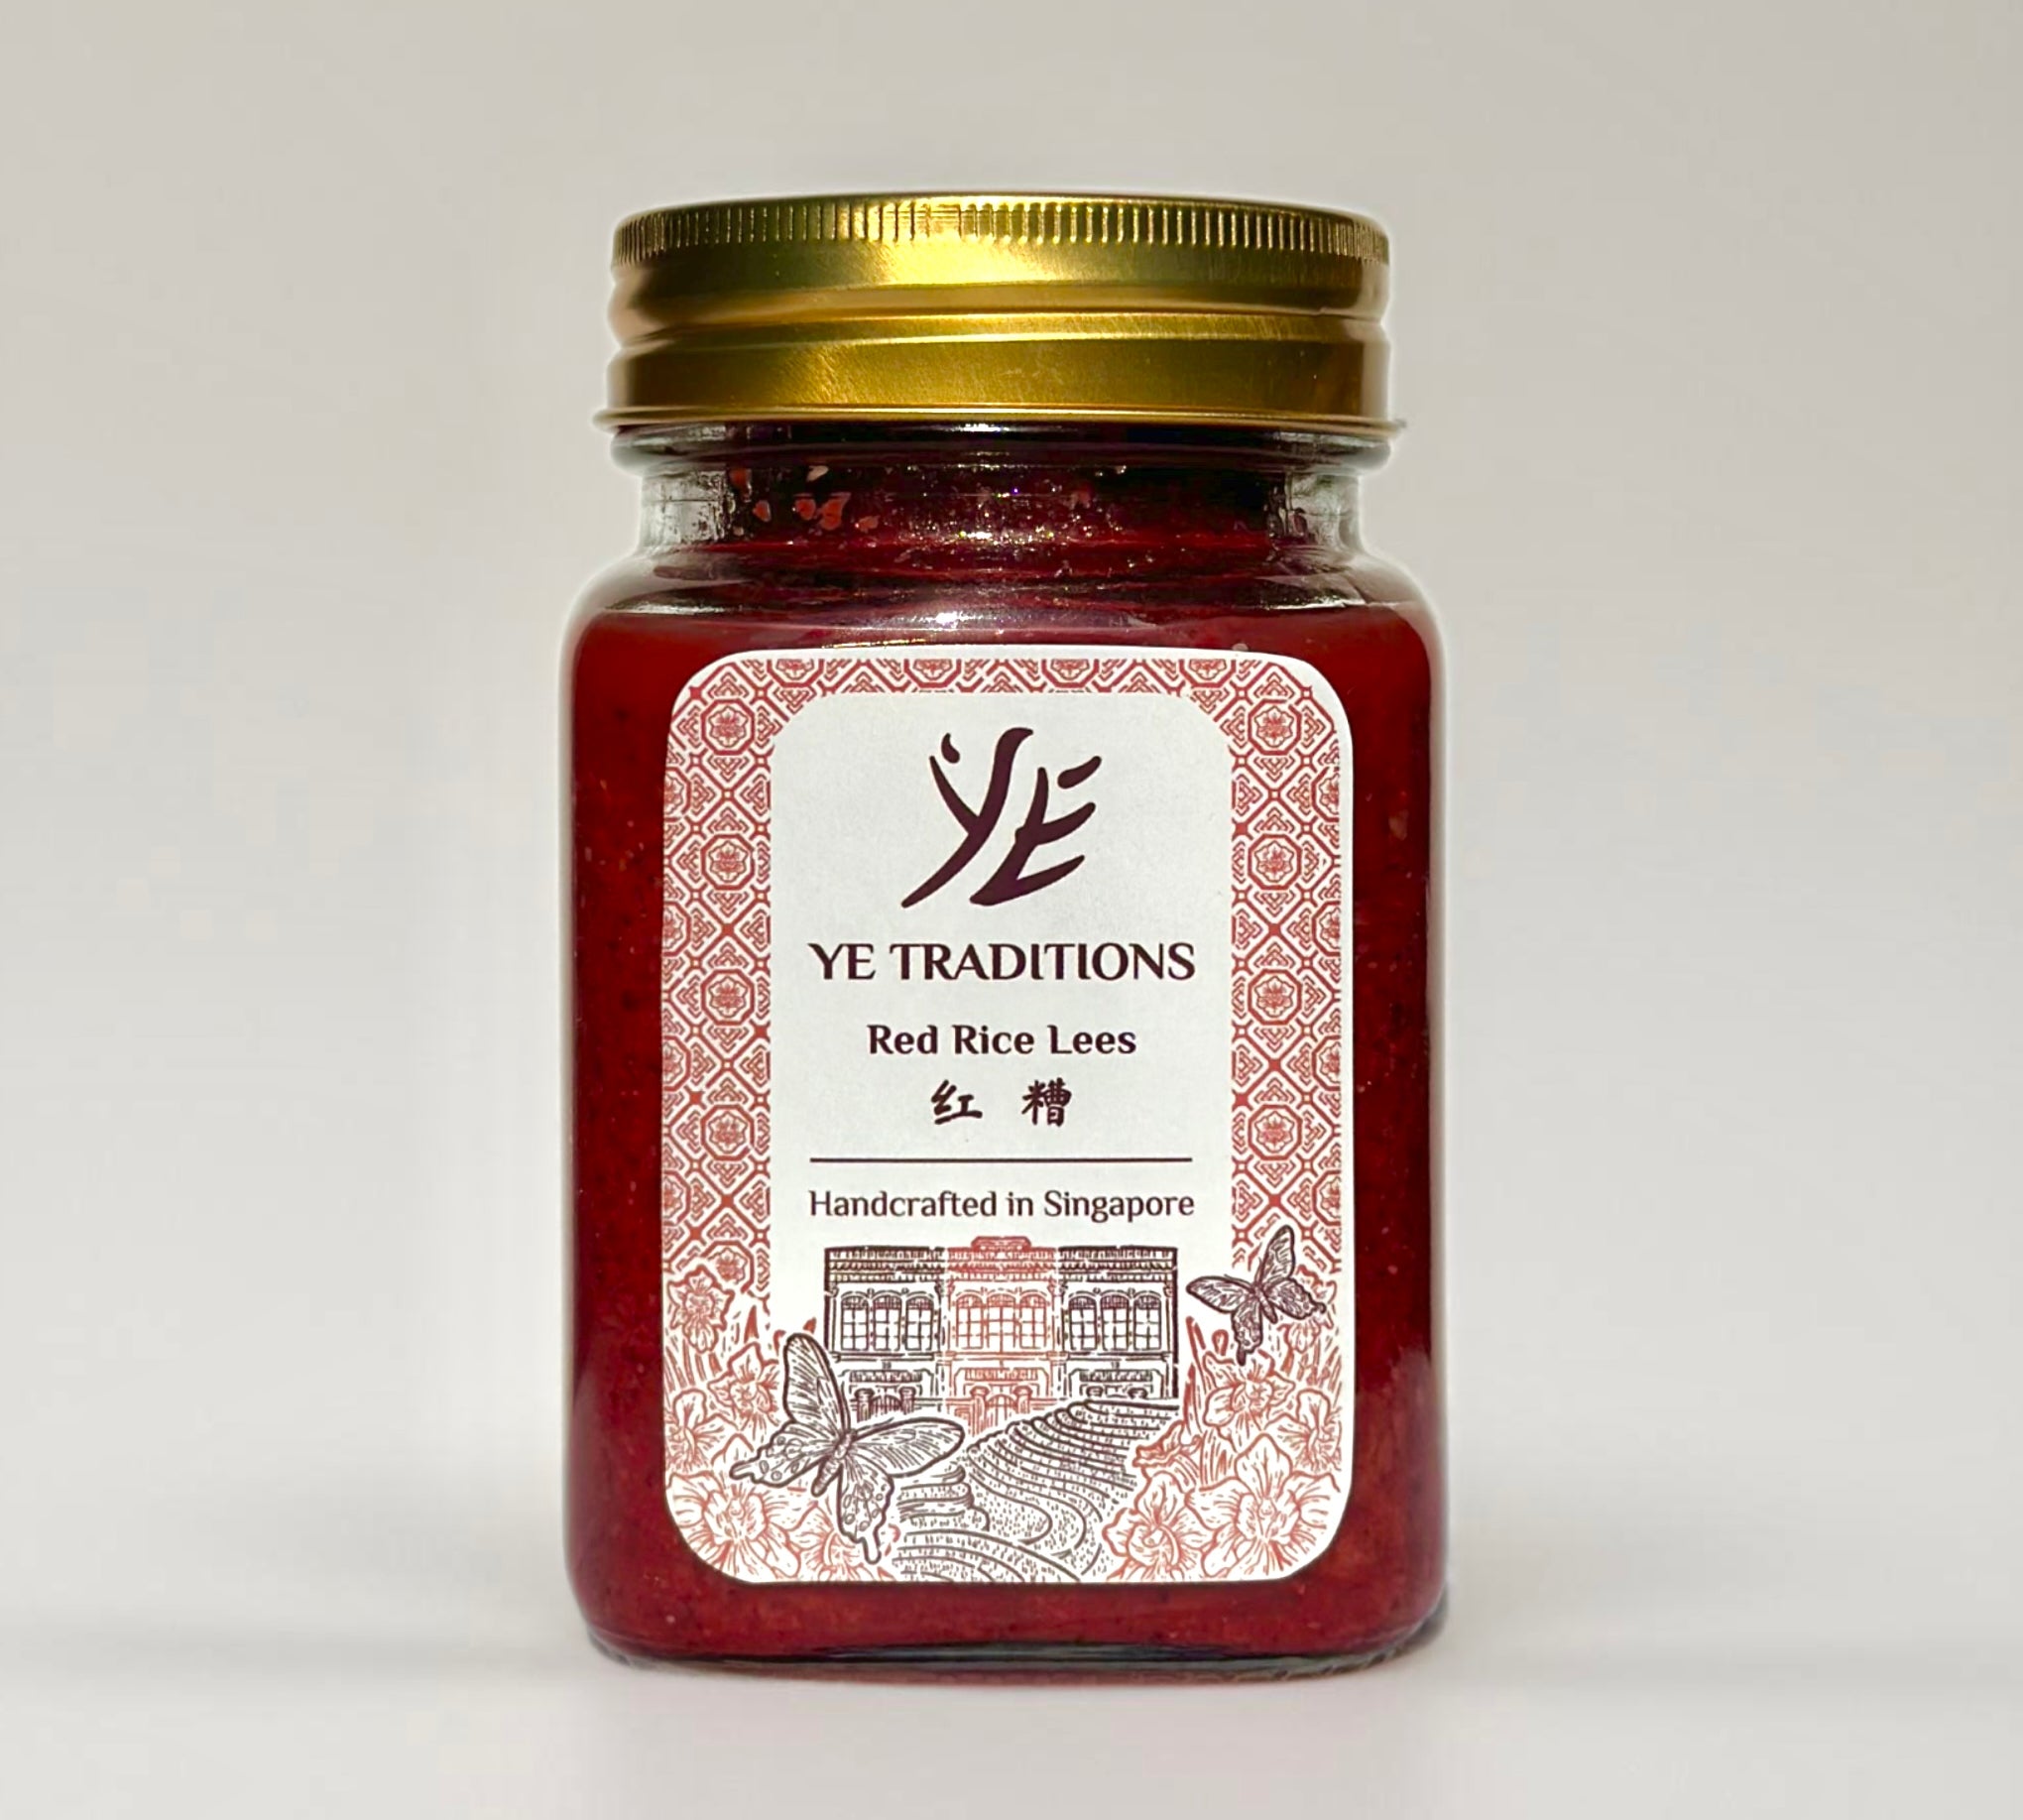  Ye Traditions Red Yeast Rice Lees Singapore